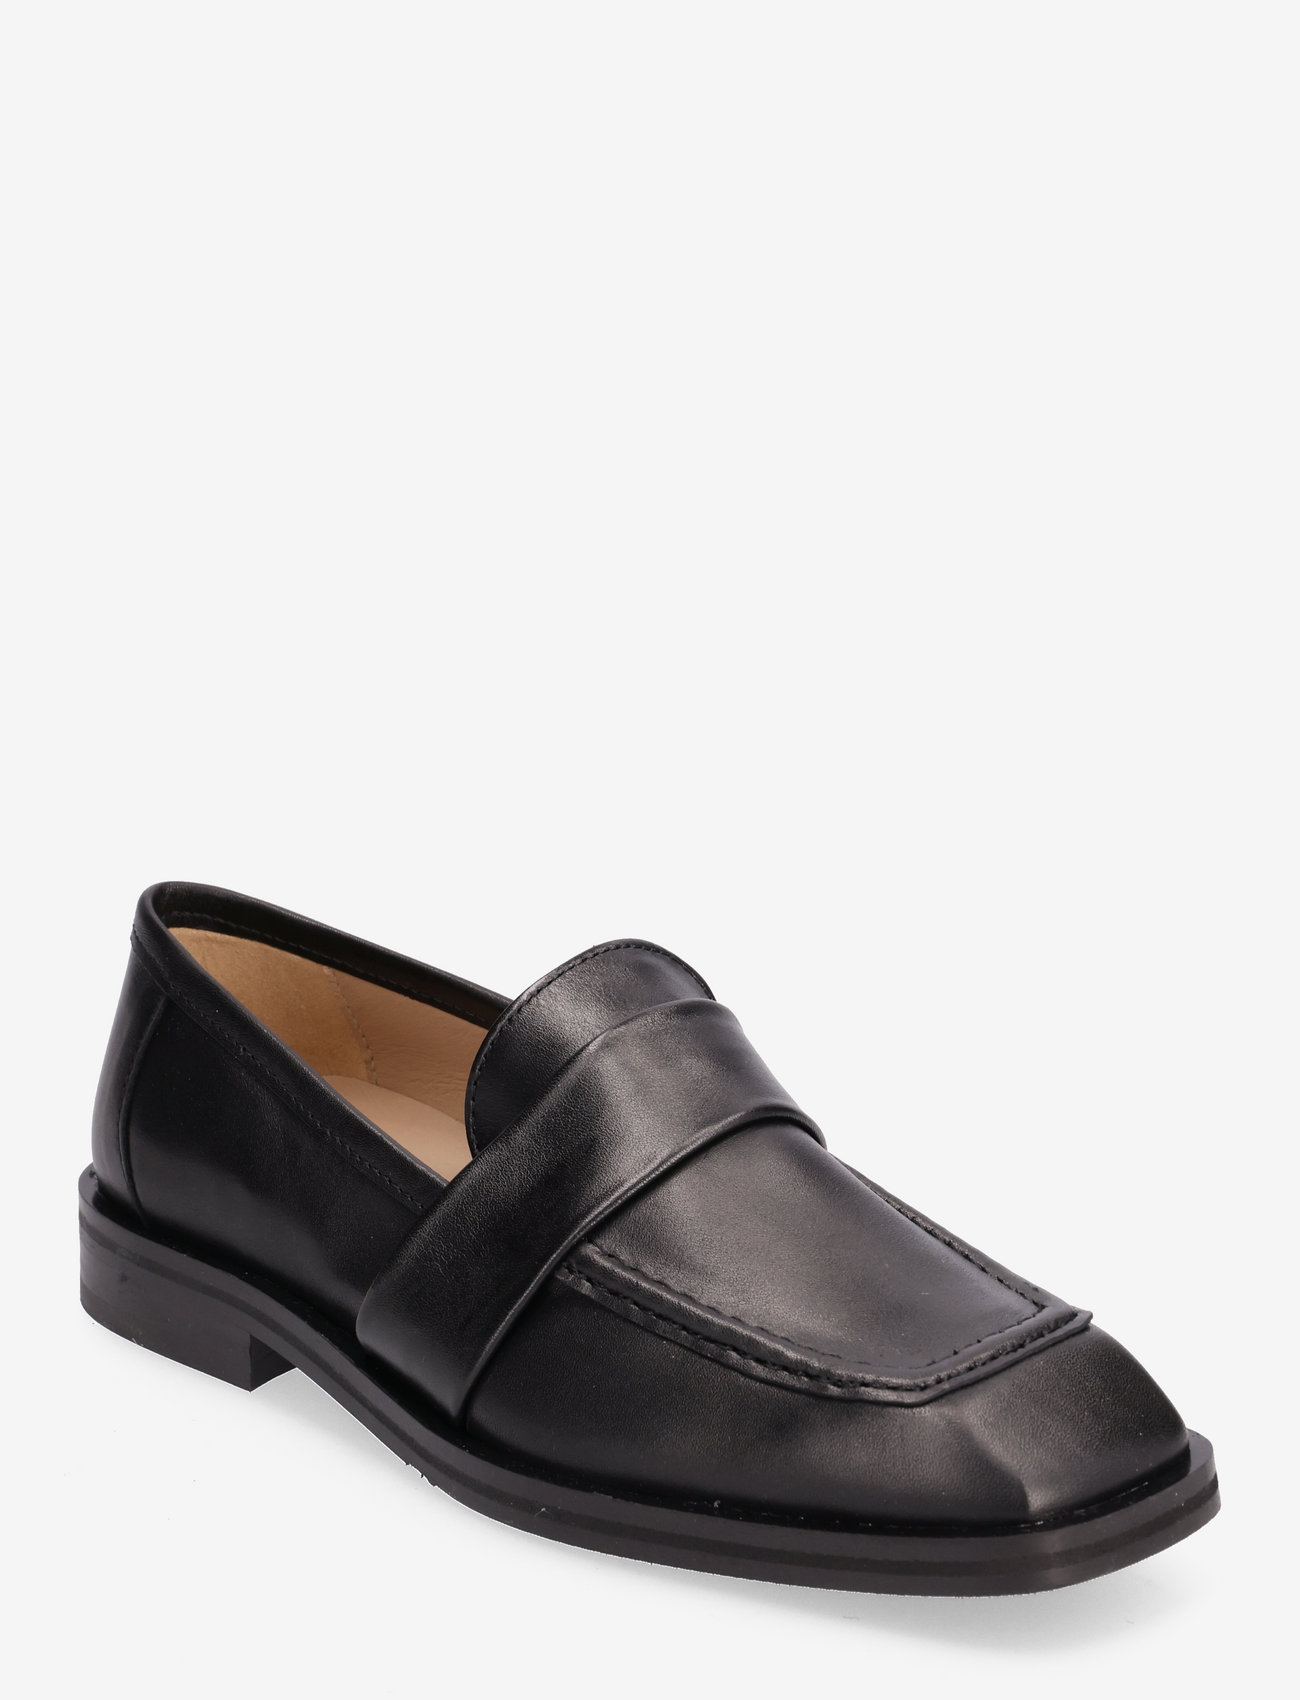 ANGULUS - Loafer - birthday gifts - 1604 black - 0